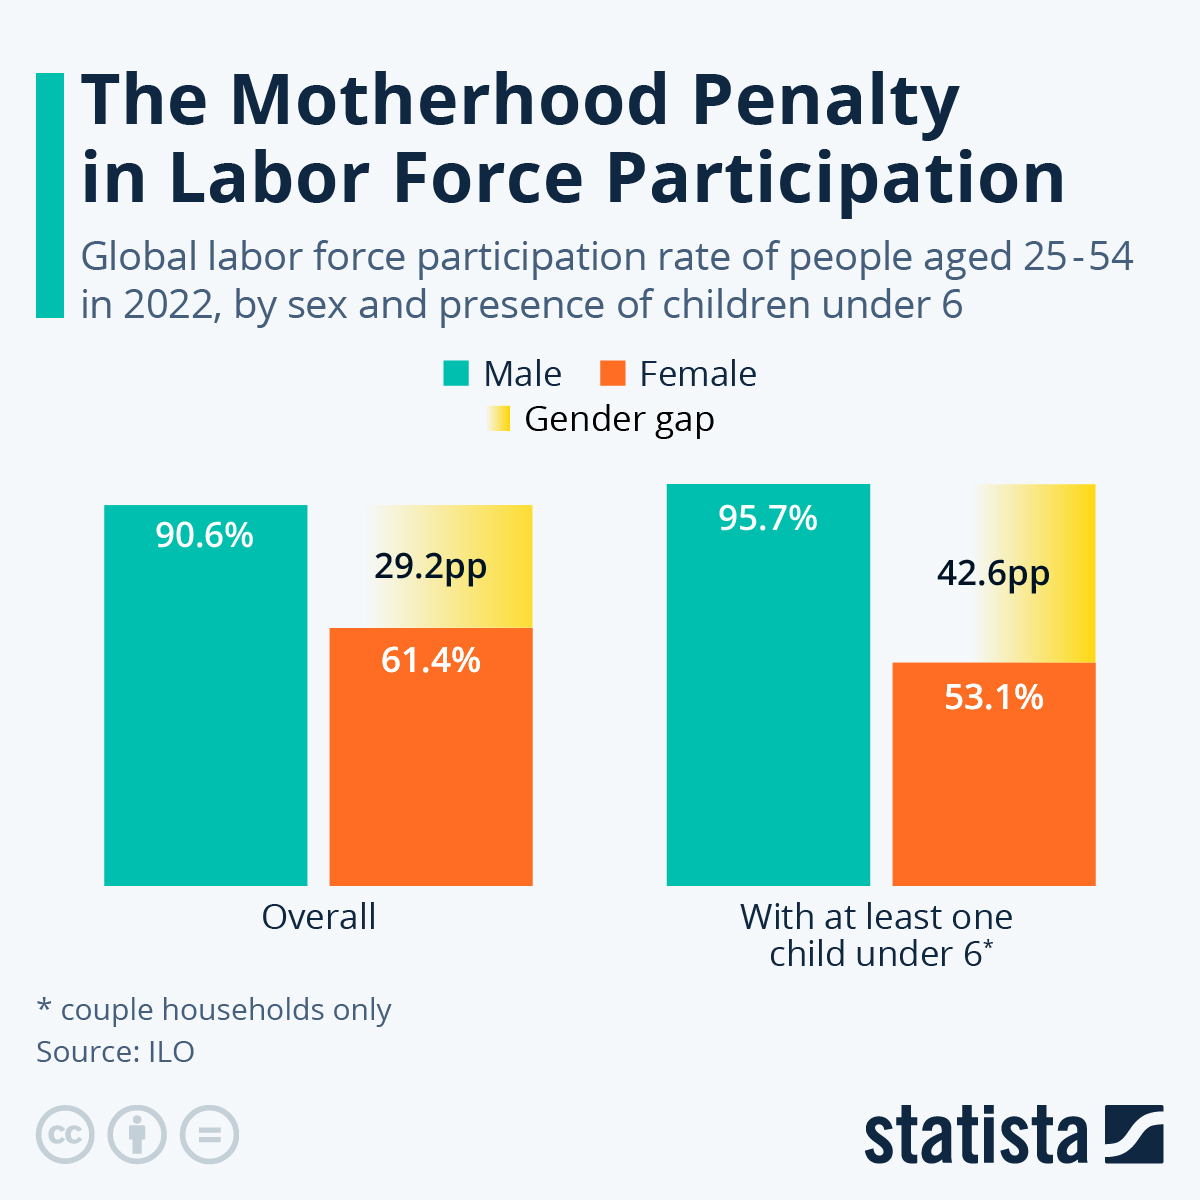 Echo Asia SDG the motherhood penalty in labor force participation in 2022, females participate at a high rate.